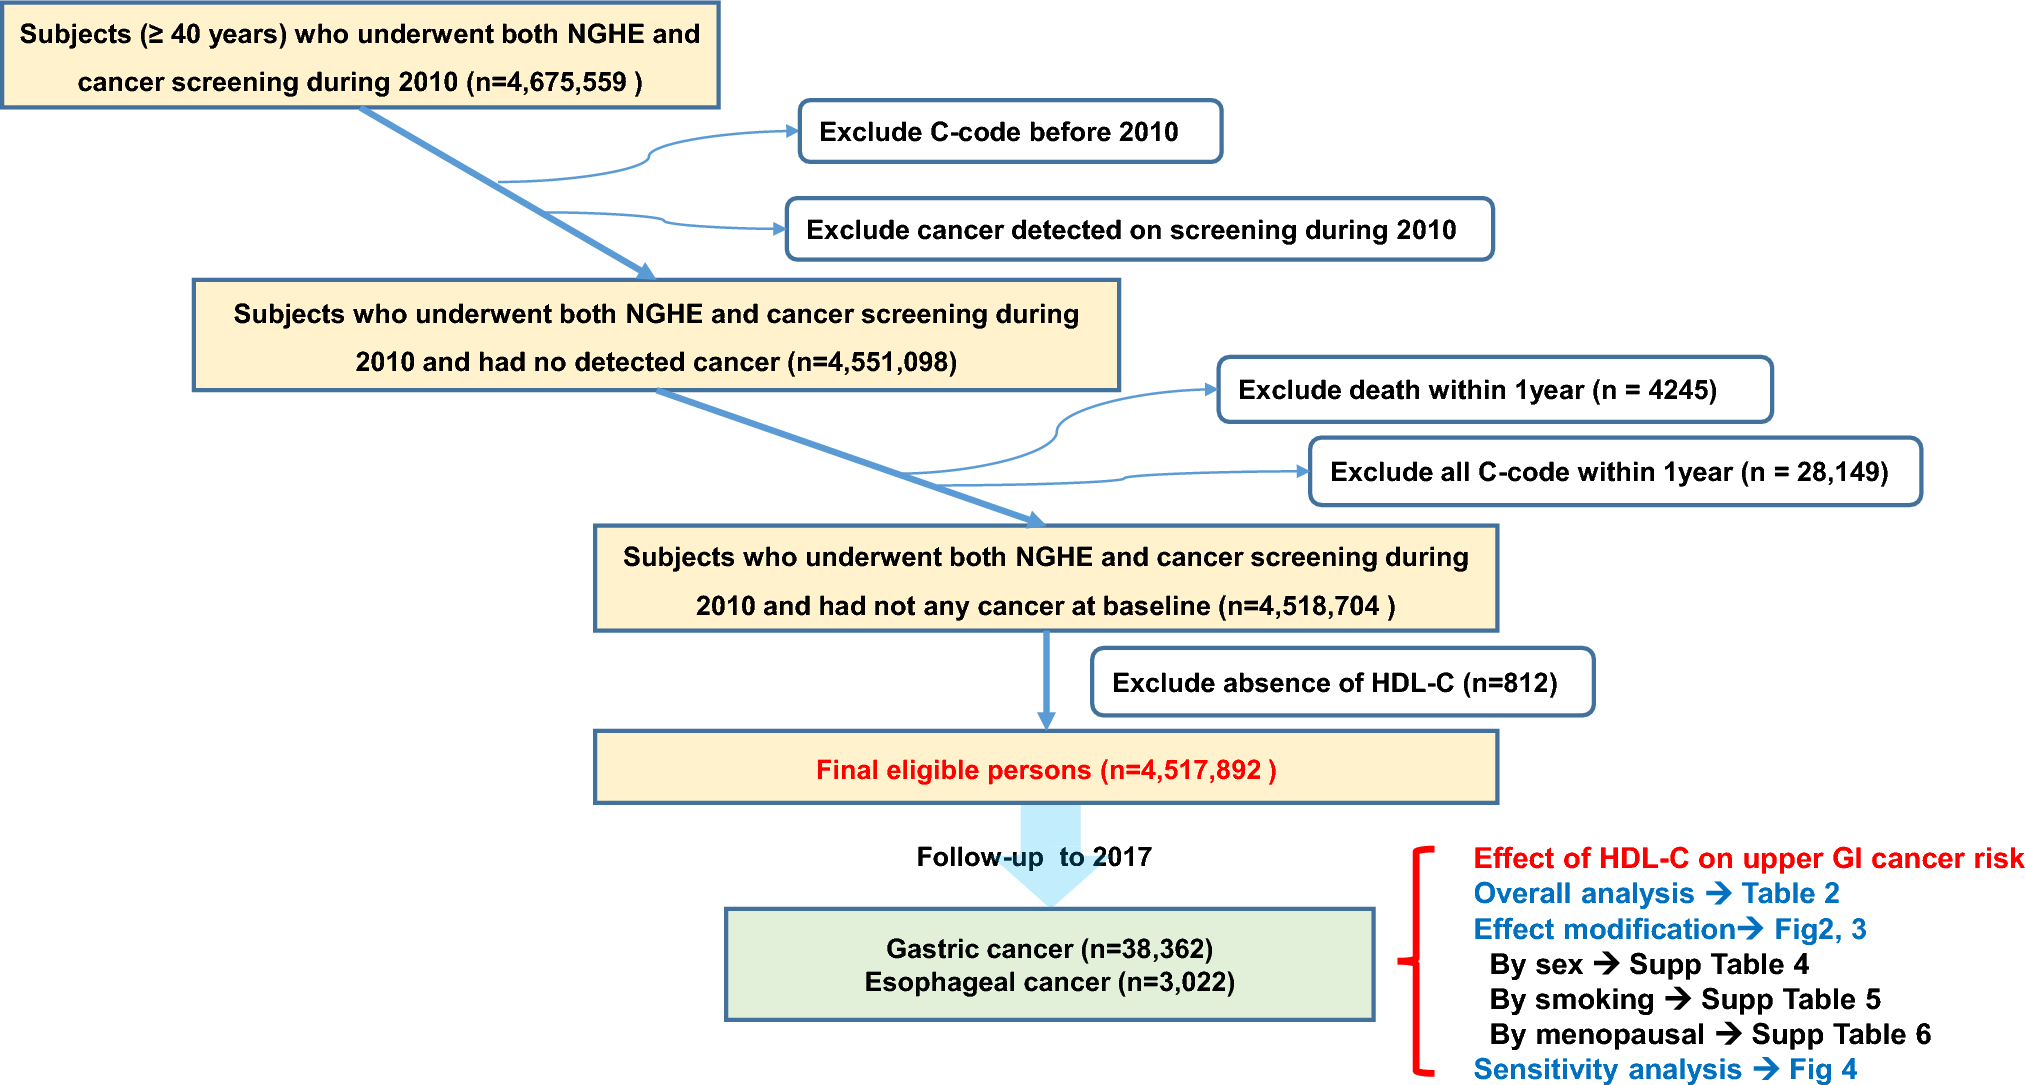 Discrepant effect of high-density lipoprotein cholesterol on esophageal and gastric cancer risk in a nationwide cohort